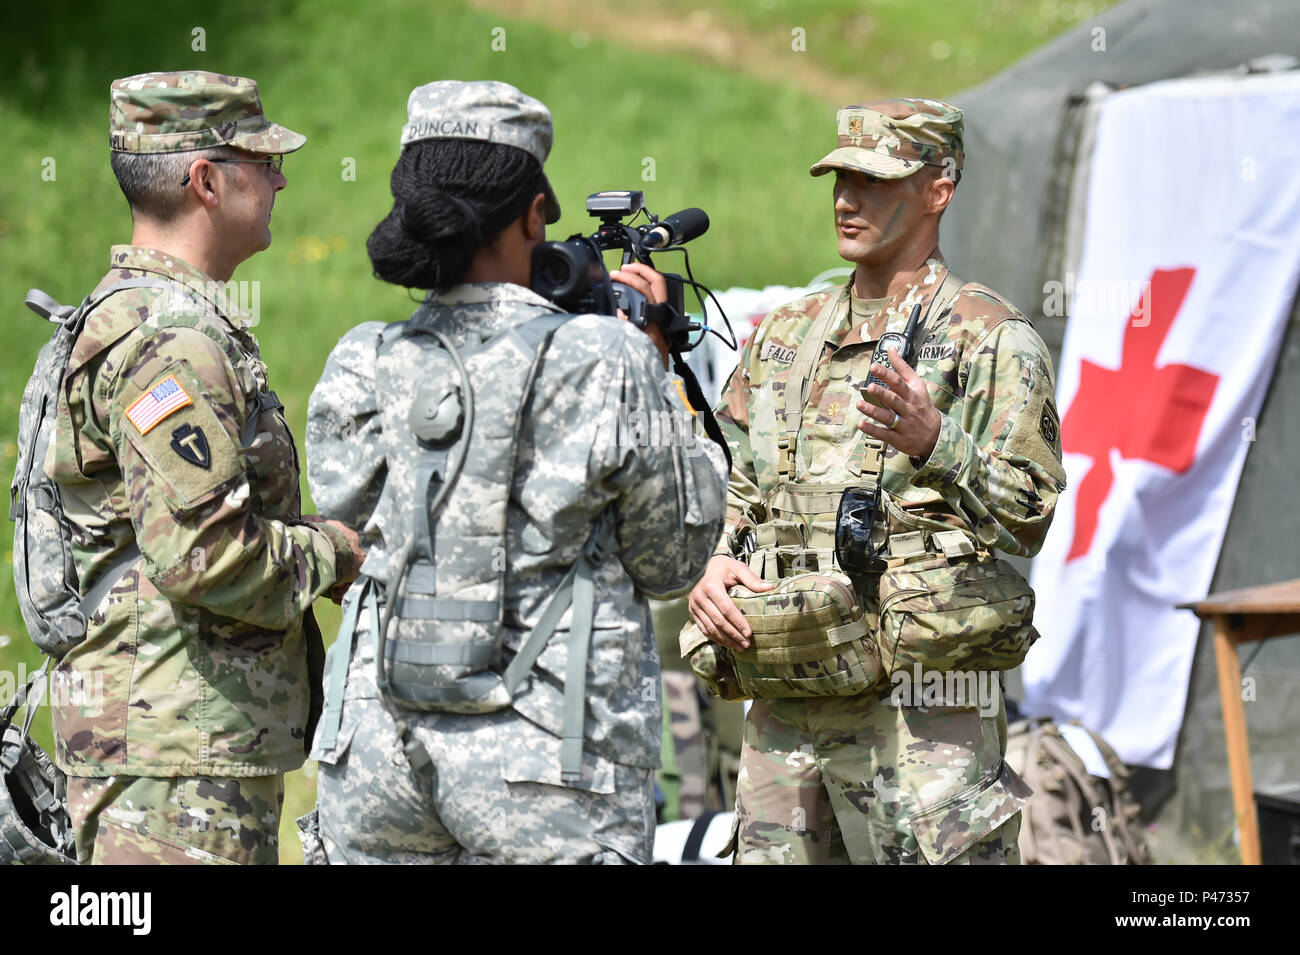 (From left to right), U.S. Army Staff Sgt. Mark Scovell and U.S. Army Sgt. Marline Duncon, both with 100th Mobile Public Affairs Detachment, interview U.S. Army Maj. James Falcon, a surgeon with the 1st Brigade Combat Team, 82nd Airborne Division, during Exercise Swift Response 16, June 16, 2016 in Hohenfels, Germany. Exercise Swift Response is one of the premier military crisis response training events for multi-national airborne forces in the world. The exercise is designed to enhance the readiness of the combat core of the U.S. Global Response Force - currently the 82nd Airborne Division's  Stock Photo